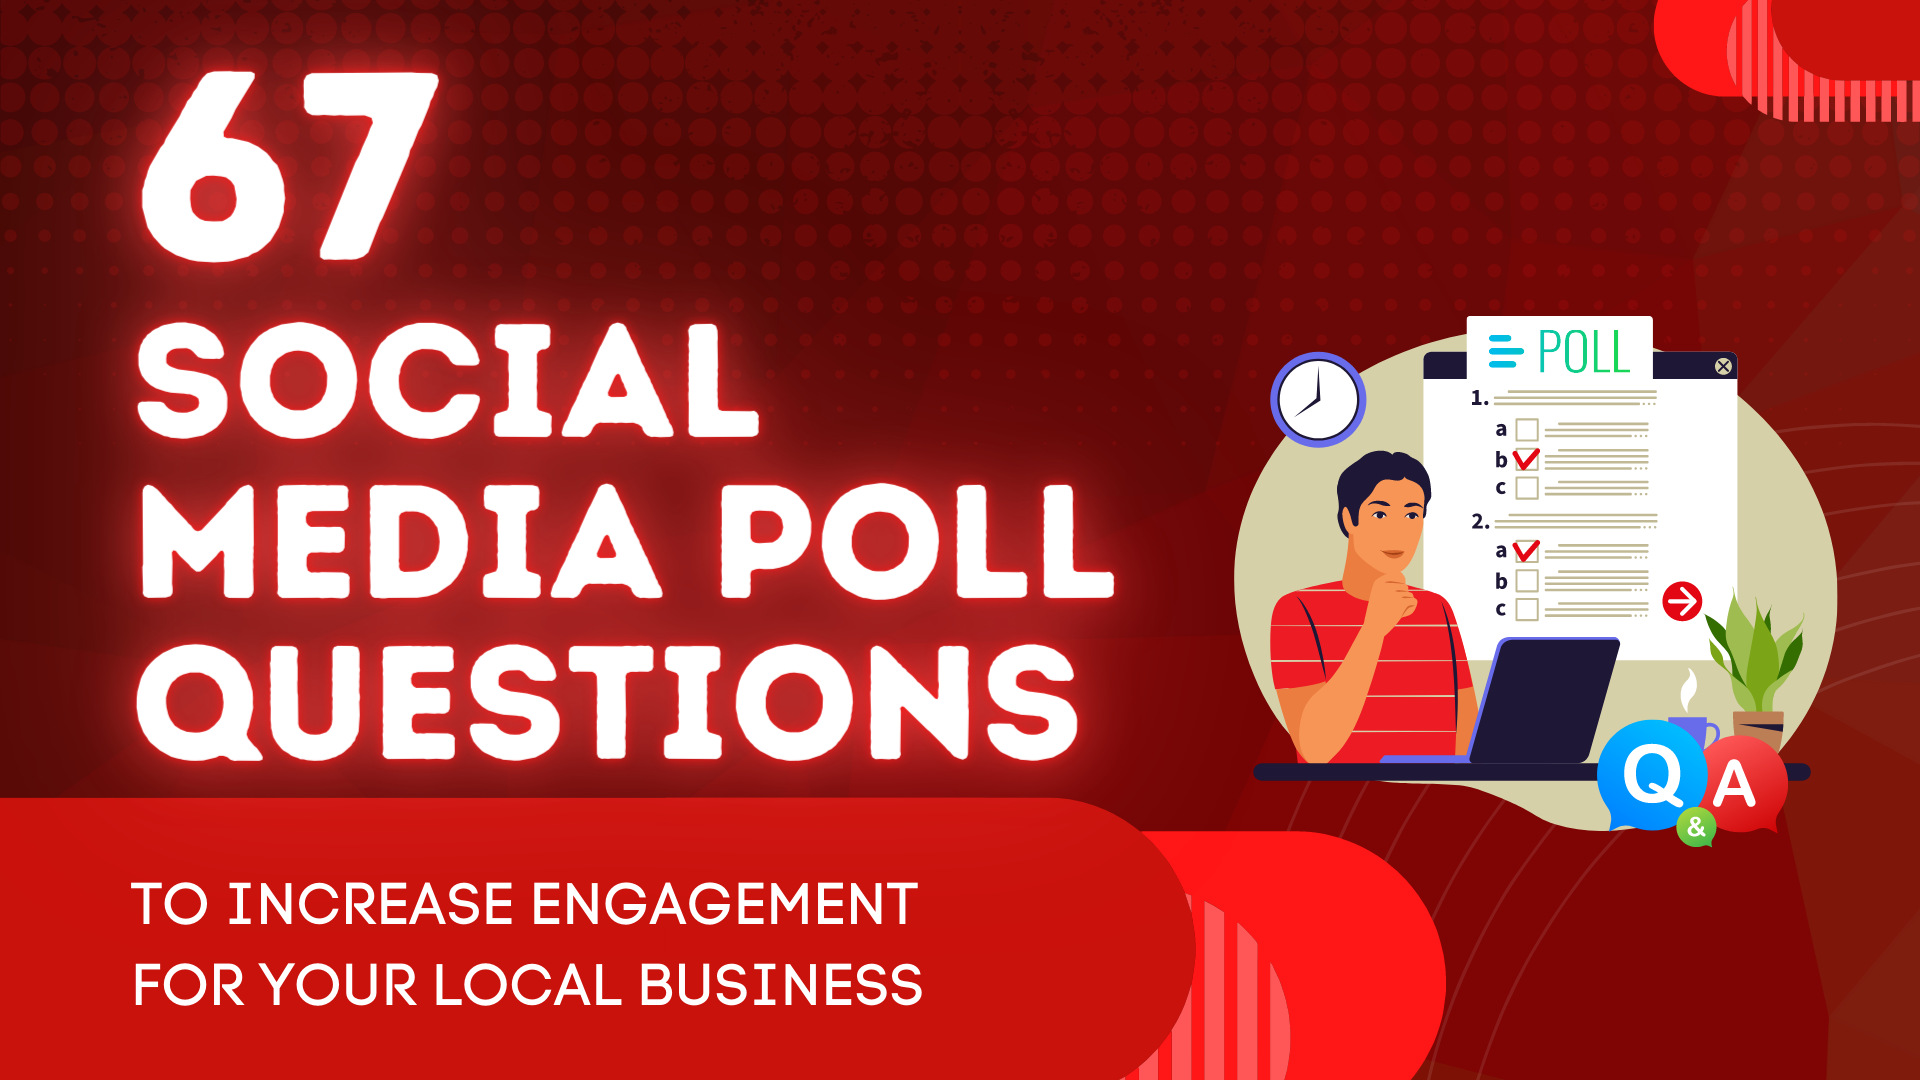 67 Social Media Poll Questions To Increase Engagement for Your Local Business